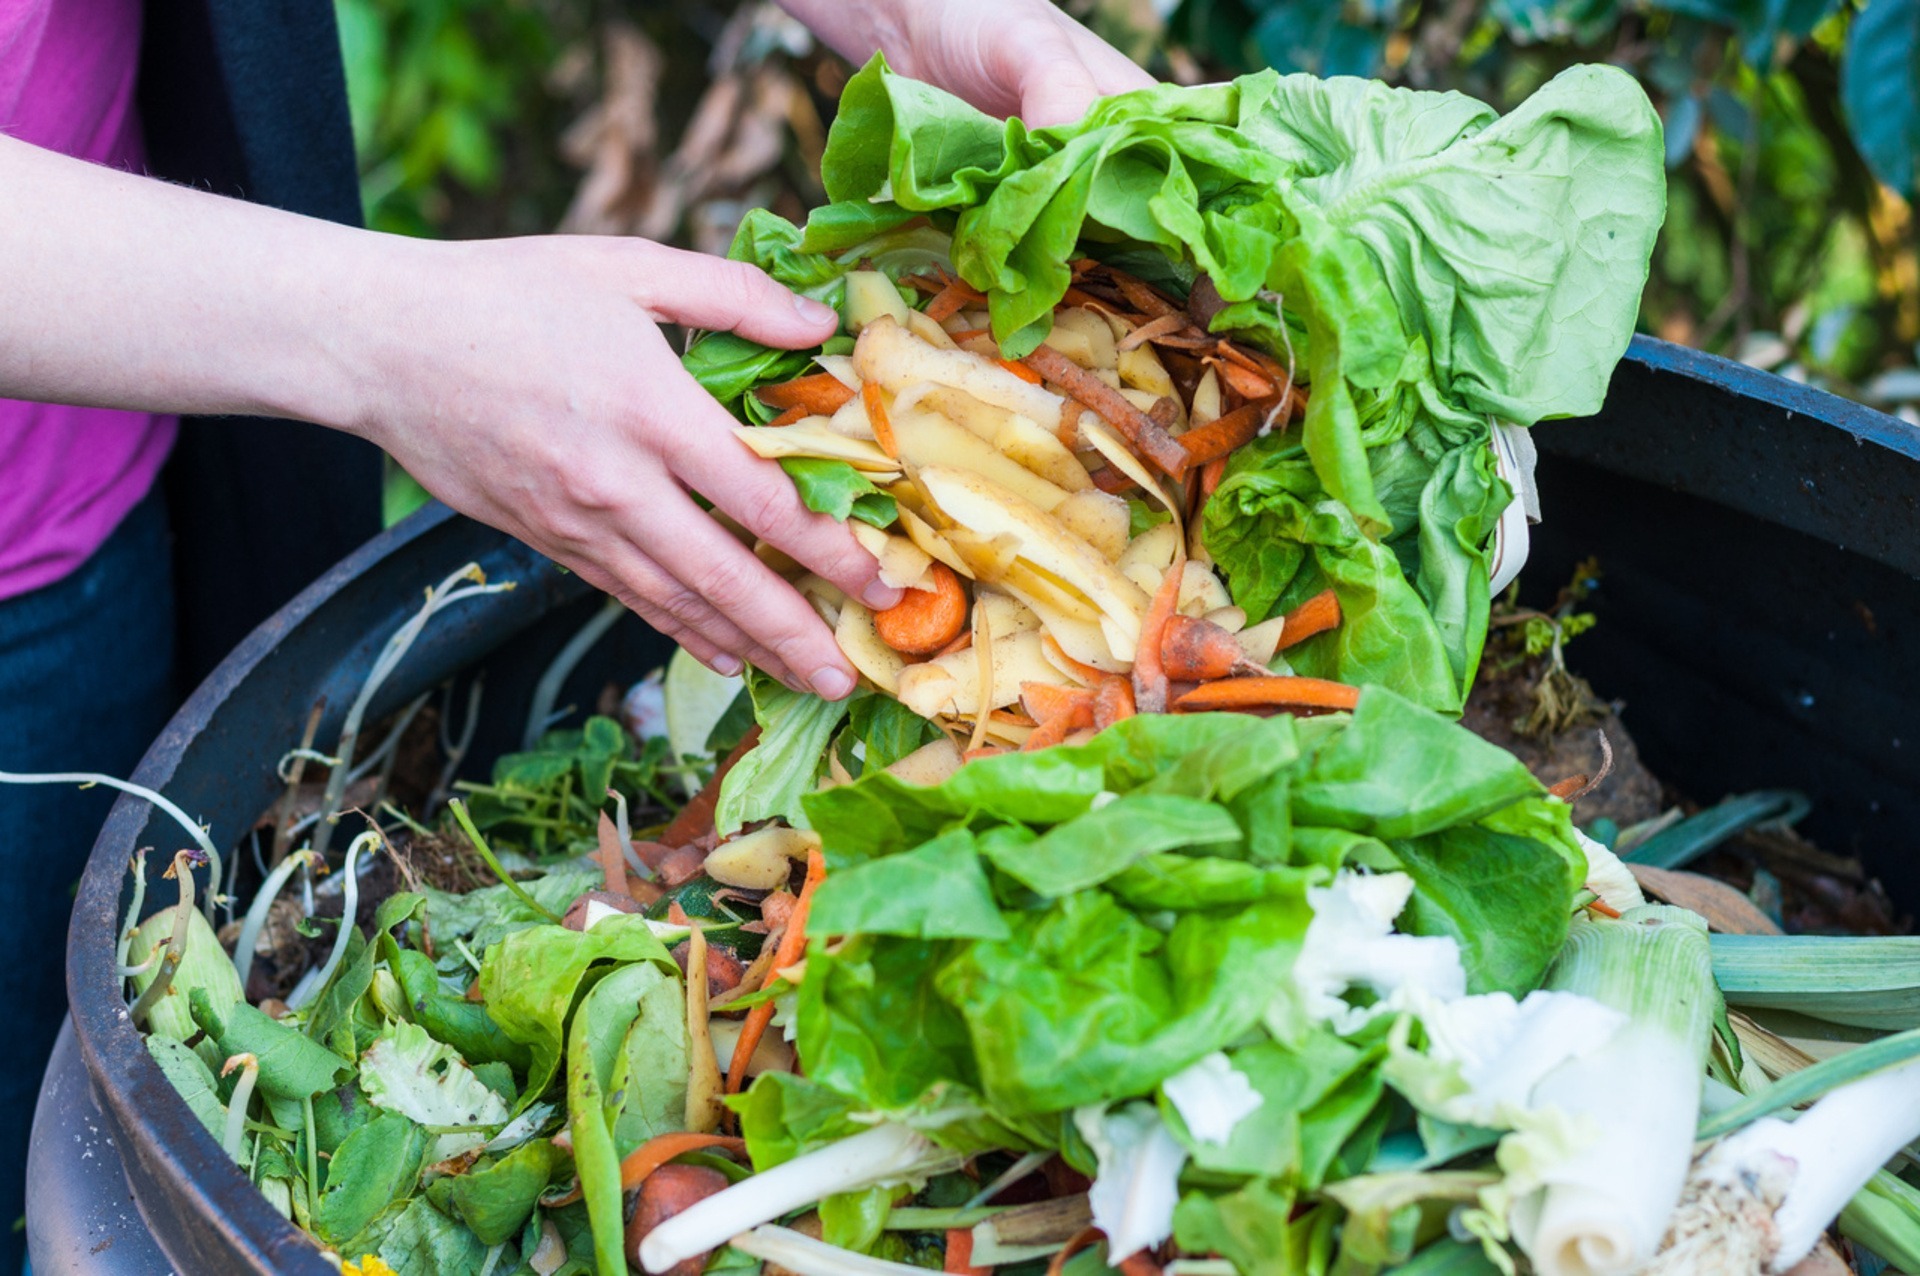 Food Waste Management Market Size Expected to Growth at a CAGR of 6.2% | Forecast Report 2022-2027